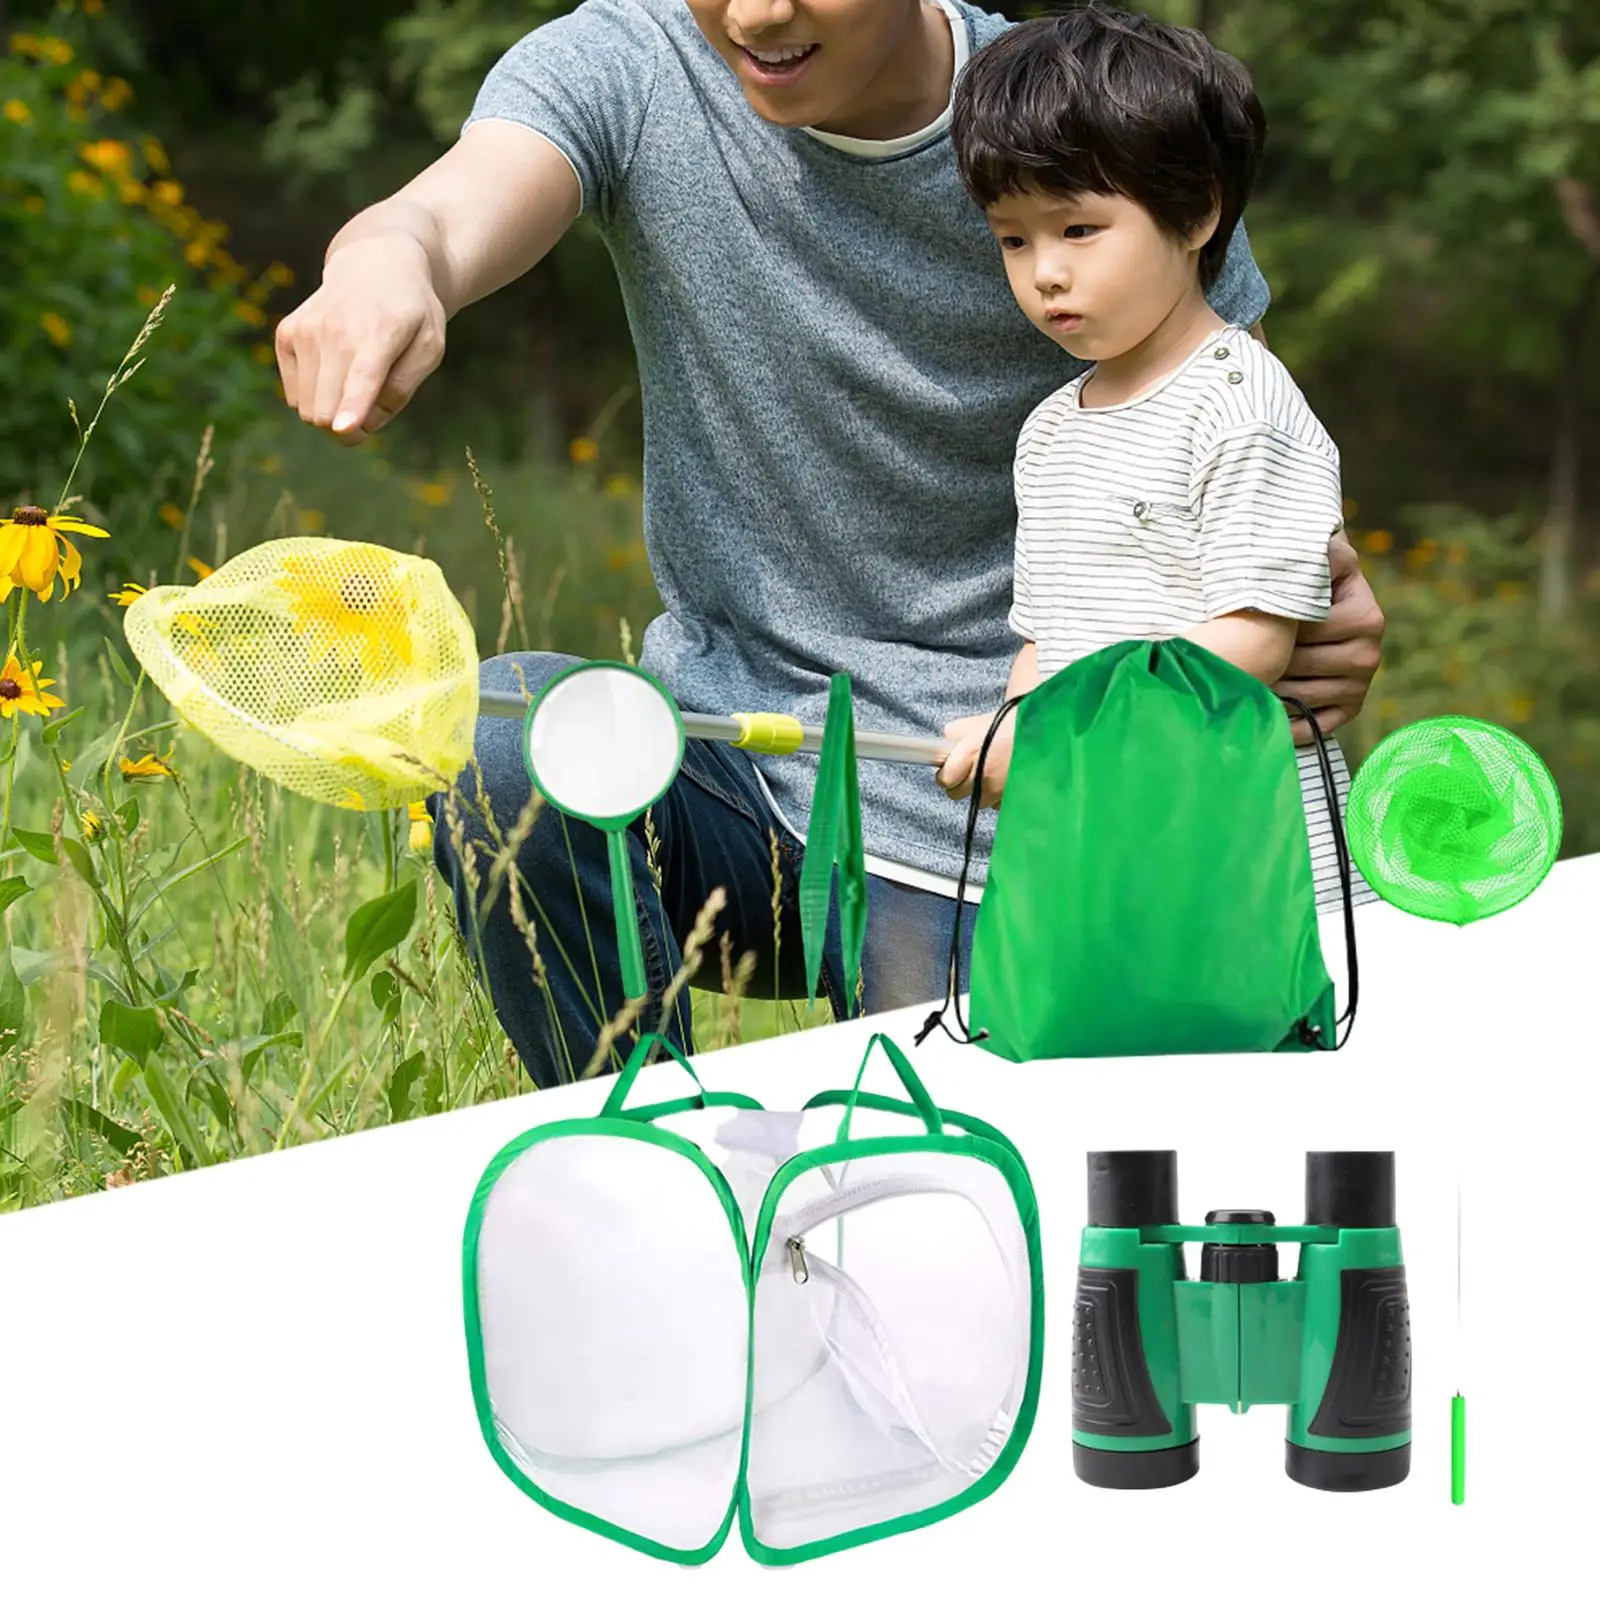 6Pcs Children Outdoor Adventure Toys Playset Magnifying Glass Tweezer Butterfly Net Outdoor Explorer Kit for Outings Hiking